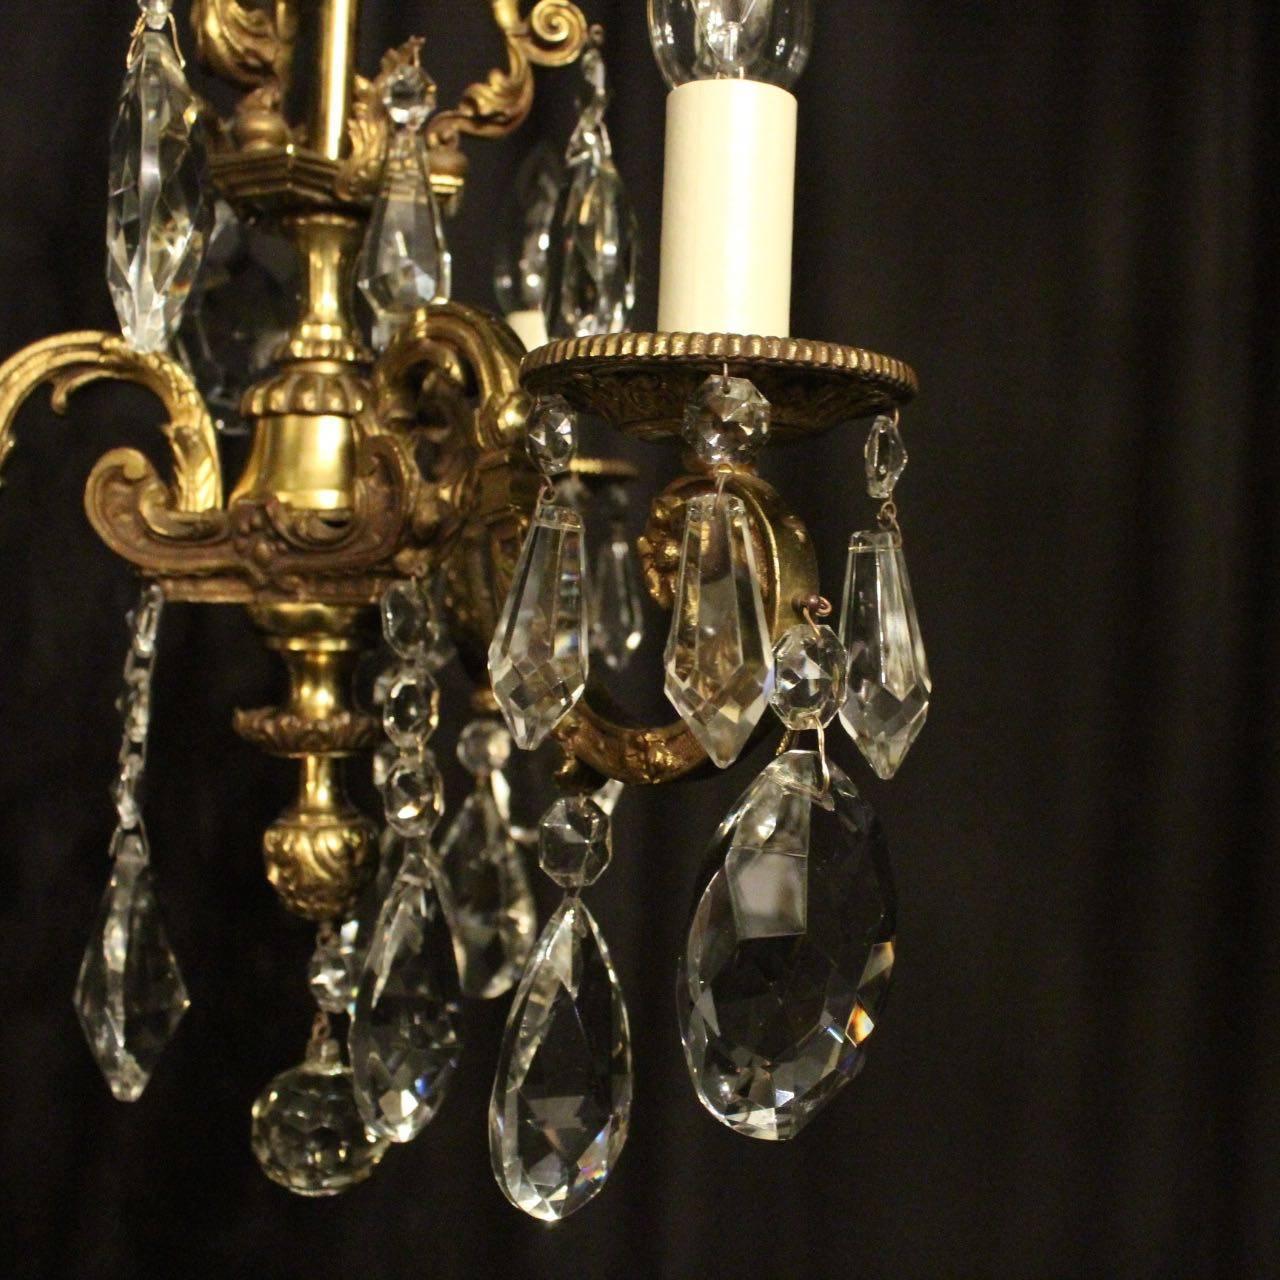 A French gilded cast brass and crystal triple light antique chandelier, the three leaf detailed square gauge scrolling arms with circular bobeches drip pans, issuing from a central cage with ornate winged lady embellishments, decorated overall with